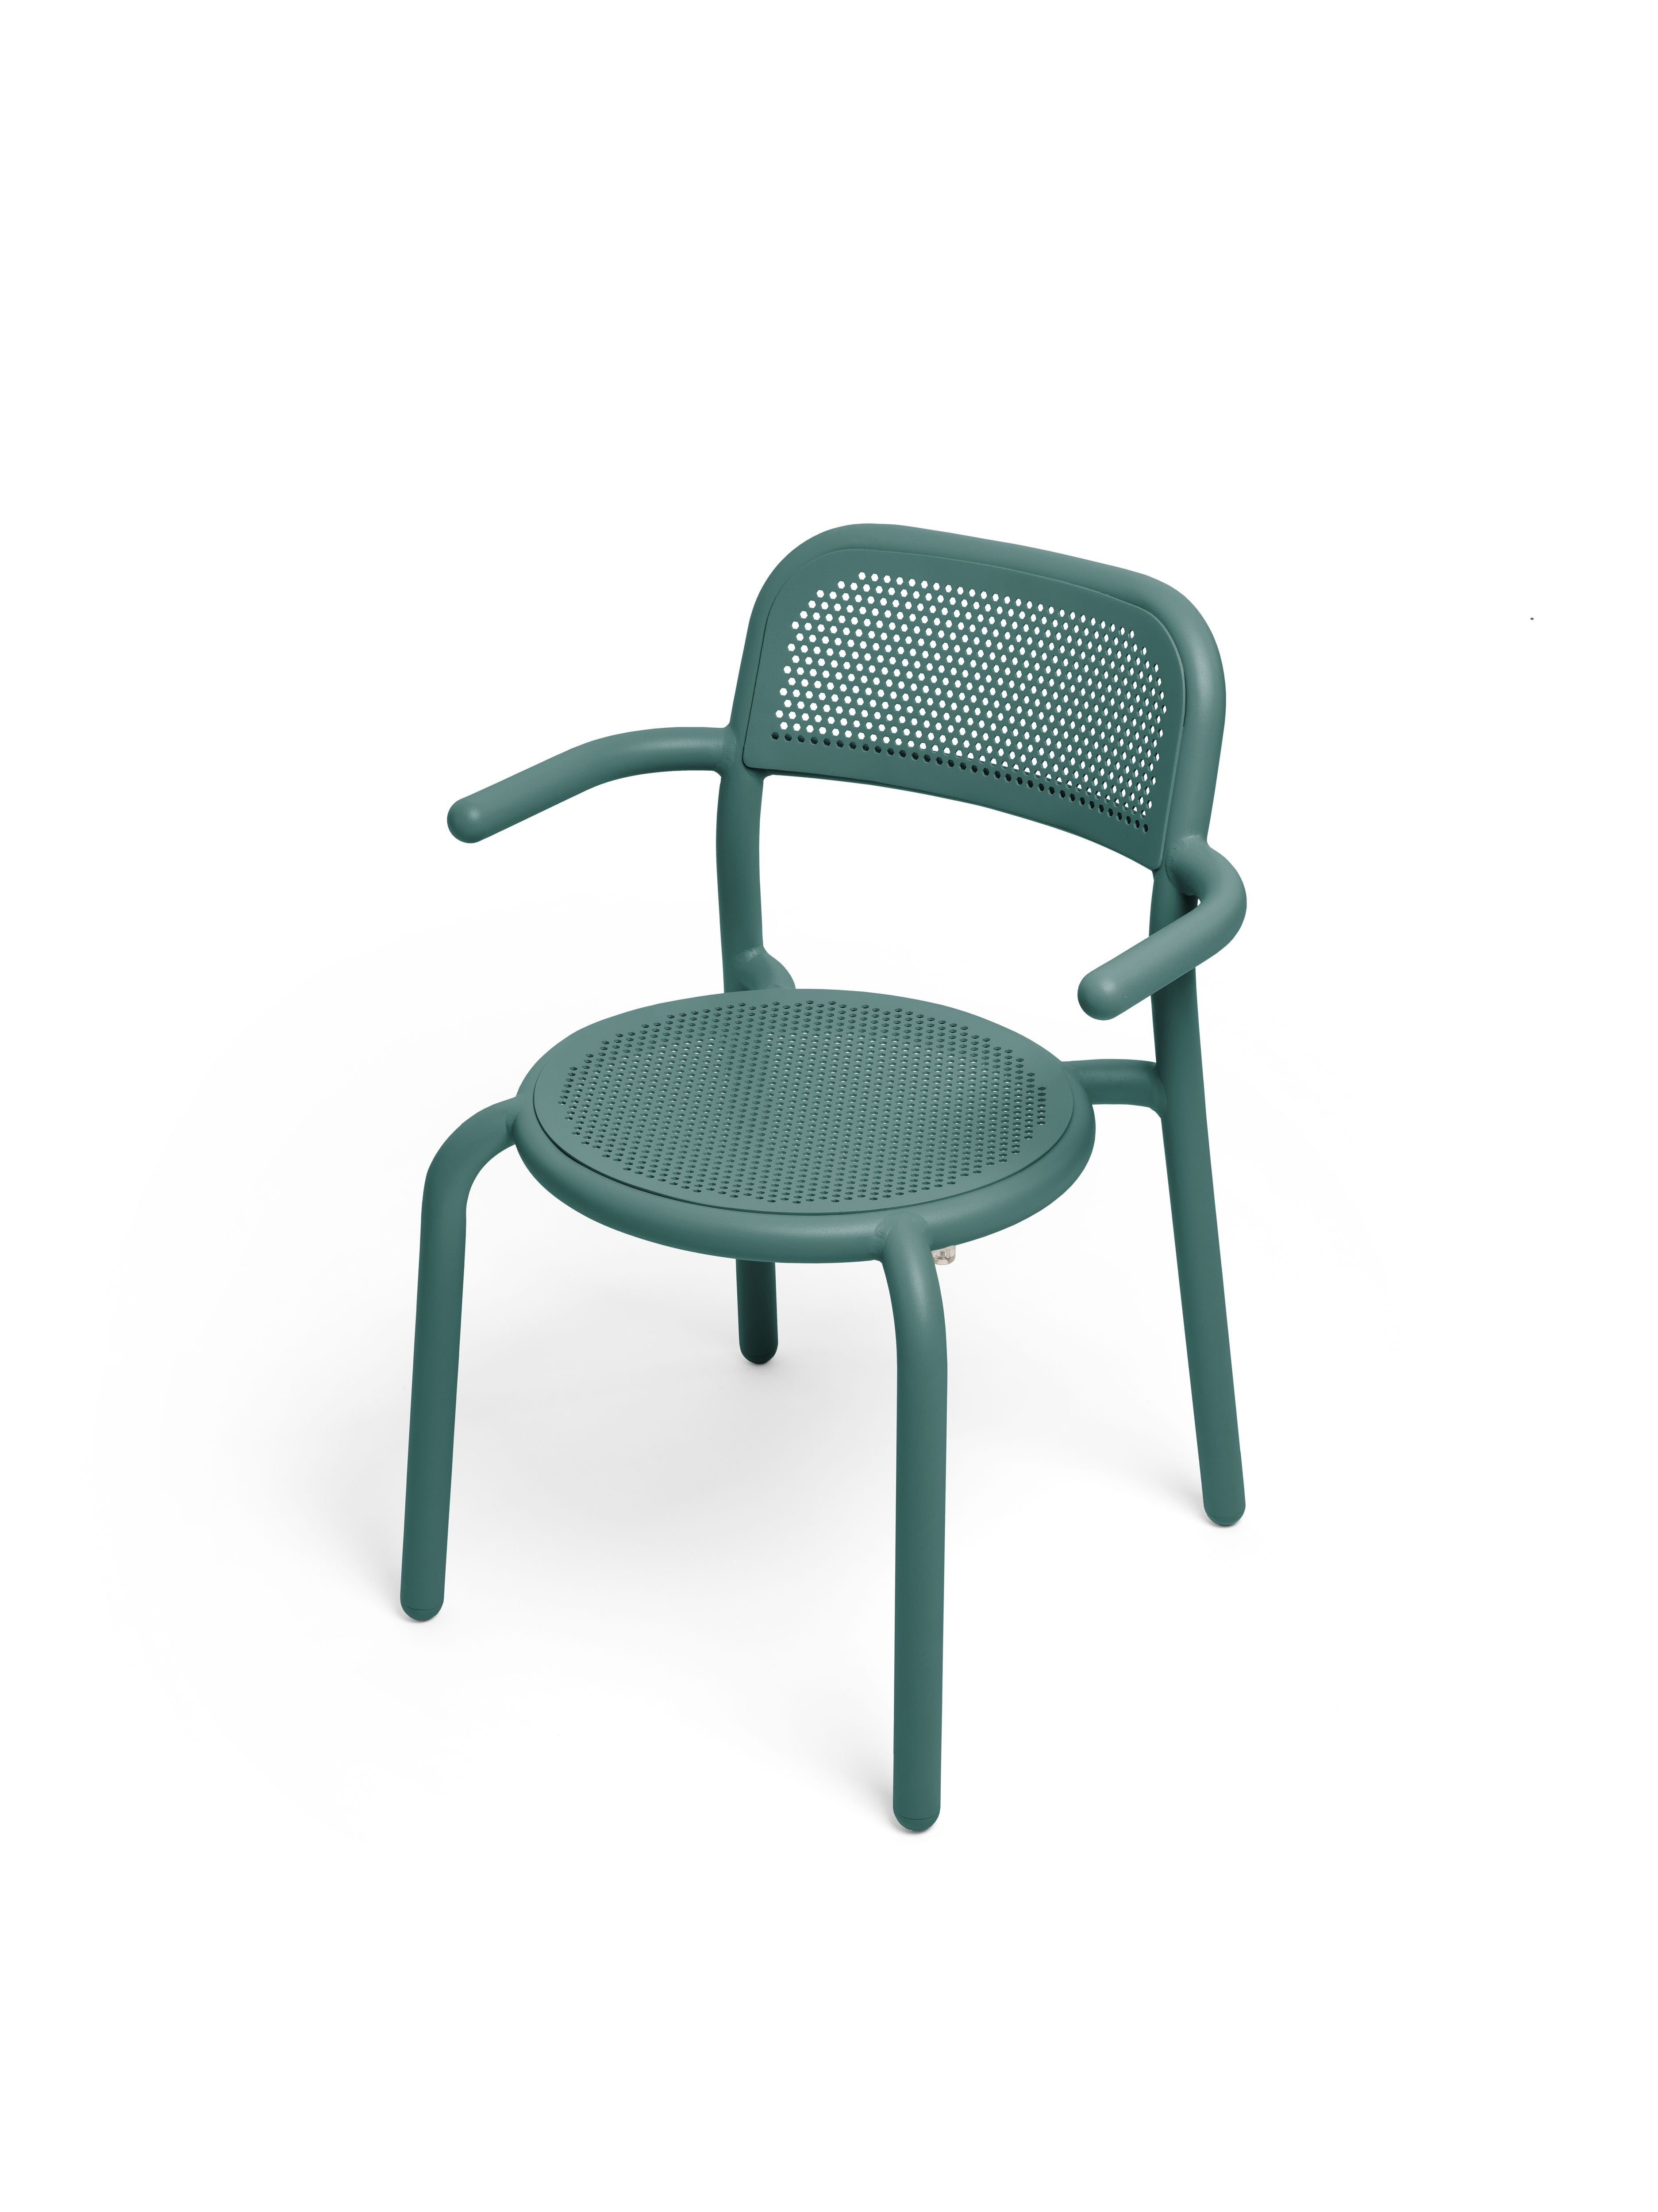 Fatboy Toni fauteuil Pine Green, 4 pc's.